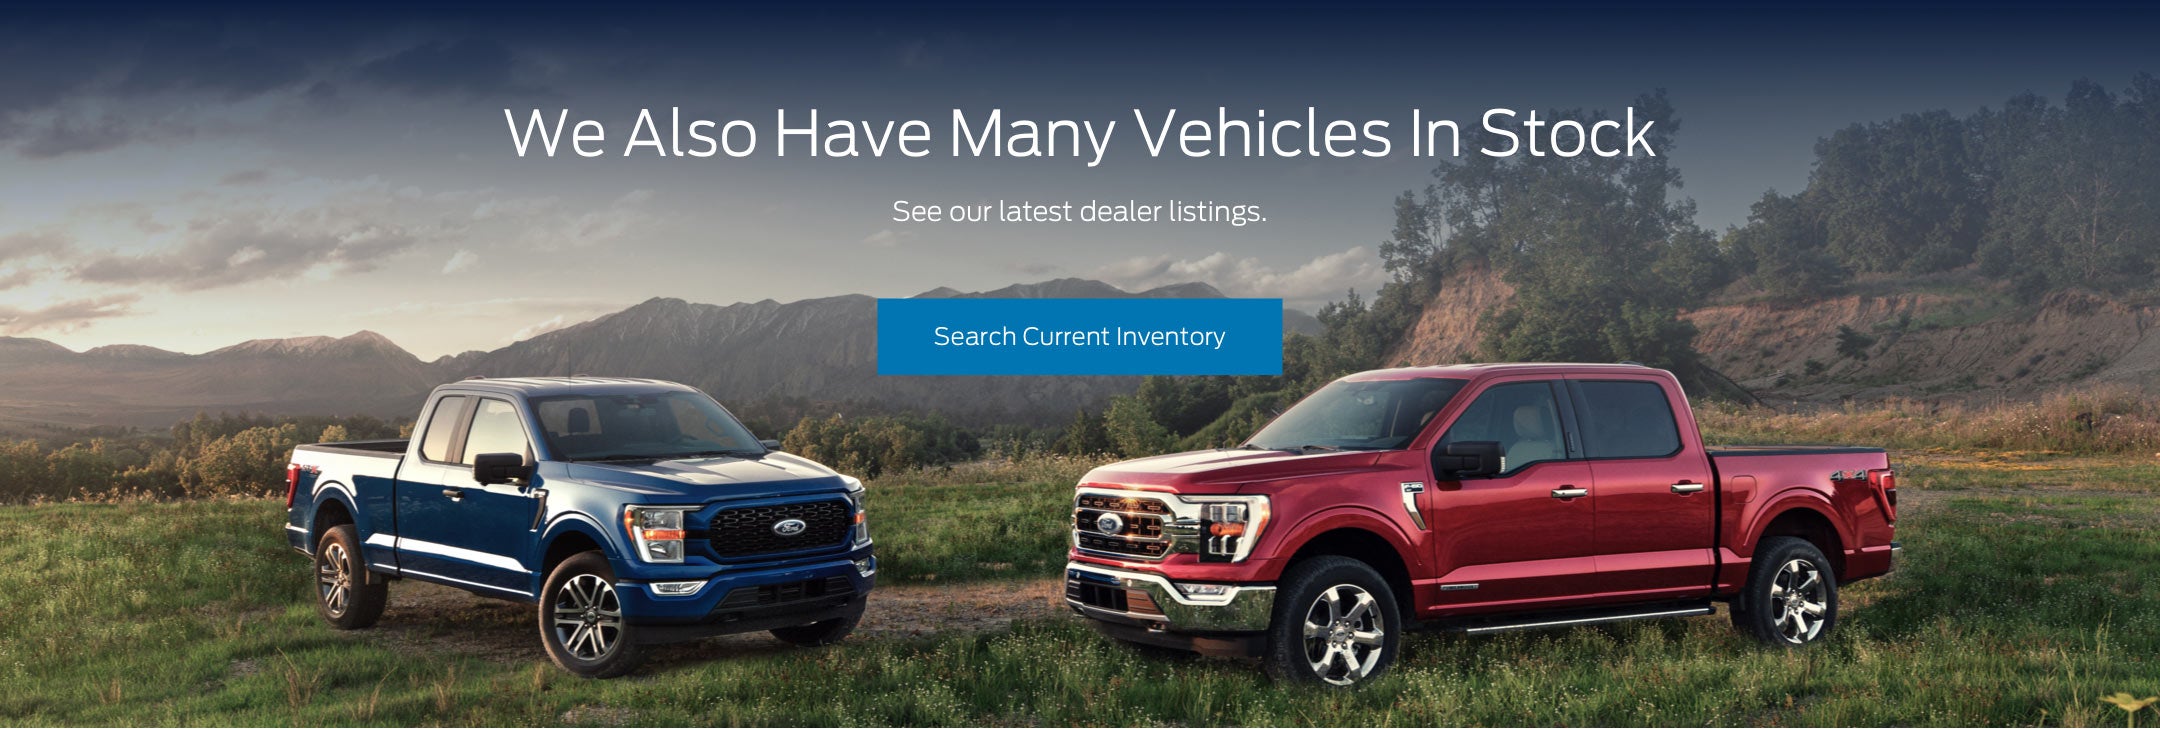 Ford vehicles in stock | Joe Rizza Ford of Orland Park in Orland Park IL